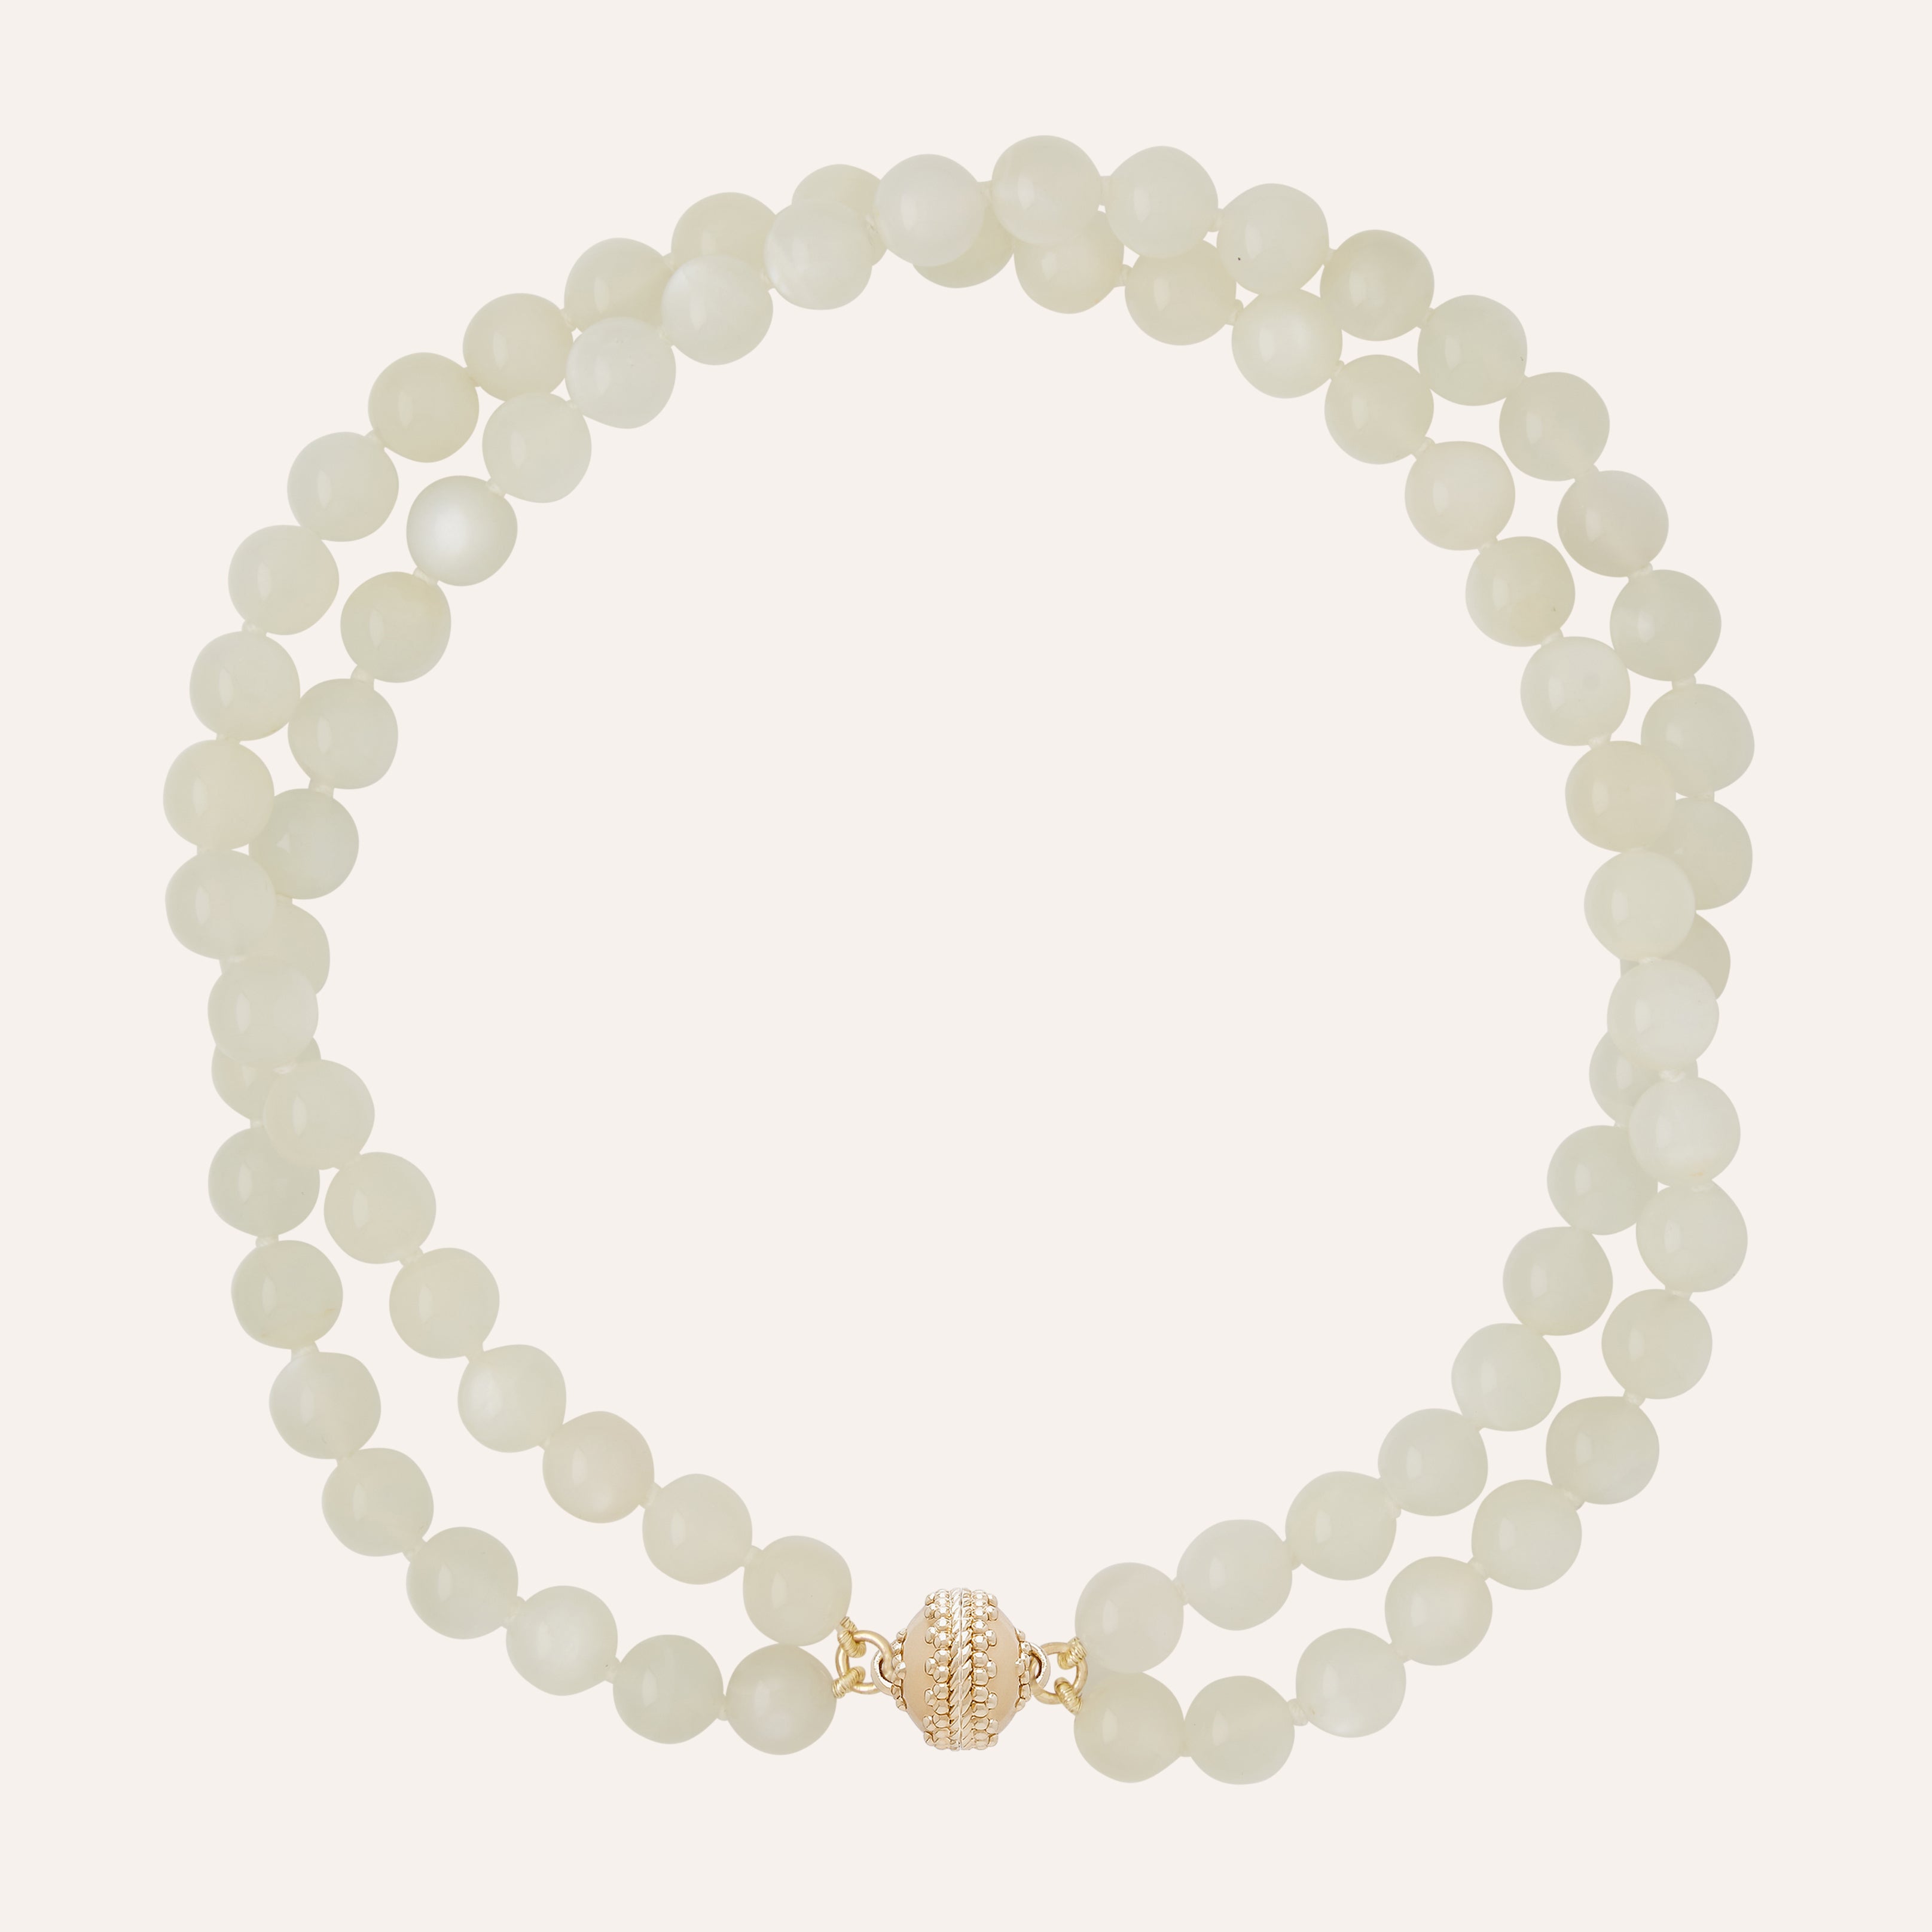 Victoire White Moonstone 10mm Double Strand Necklace